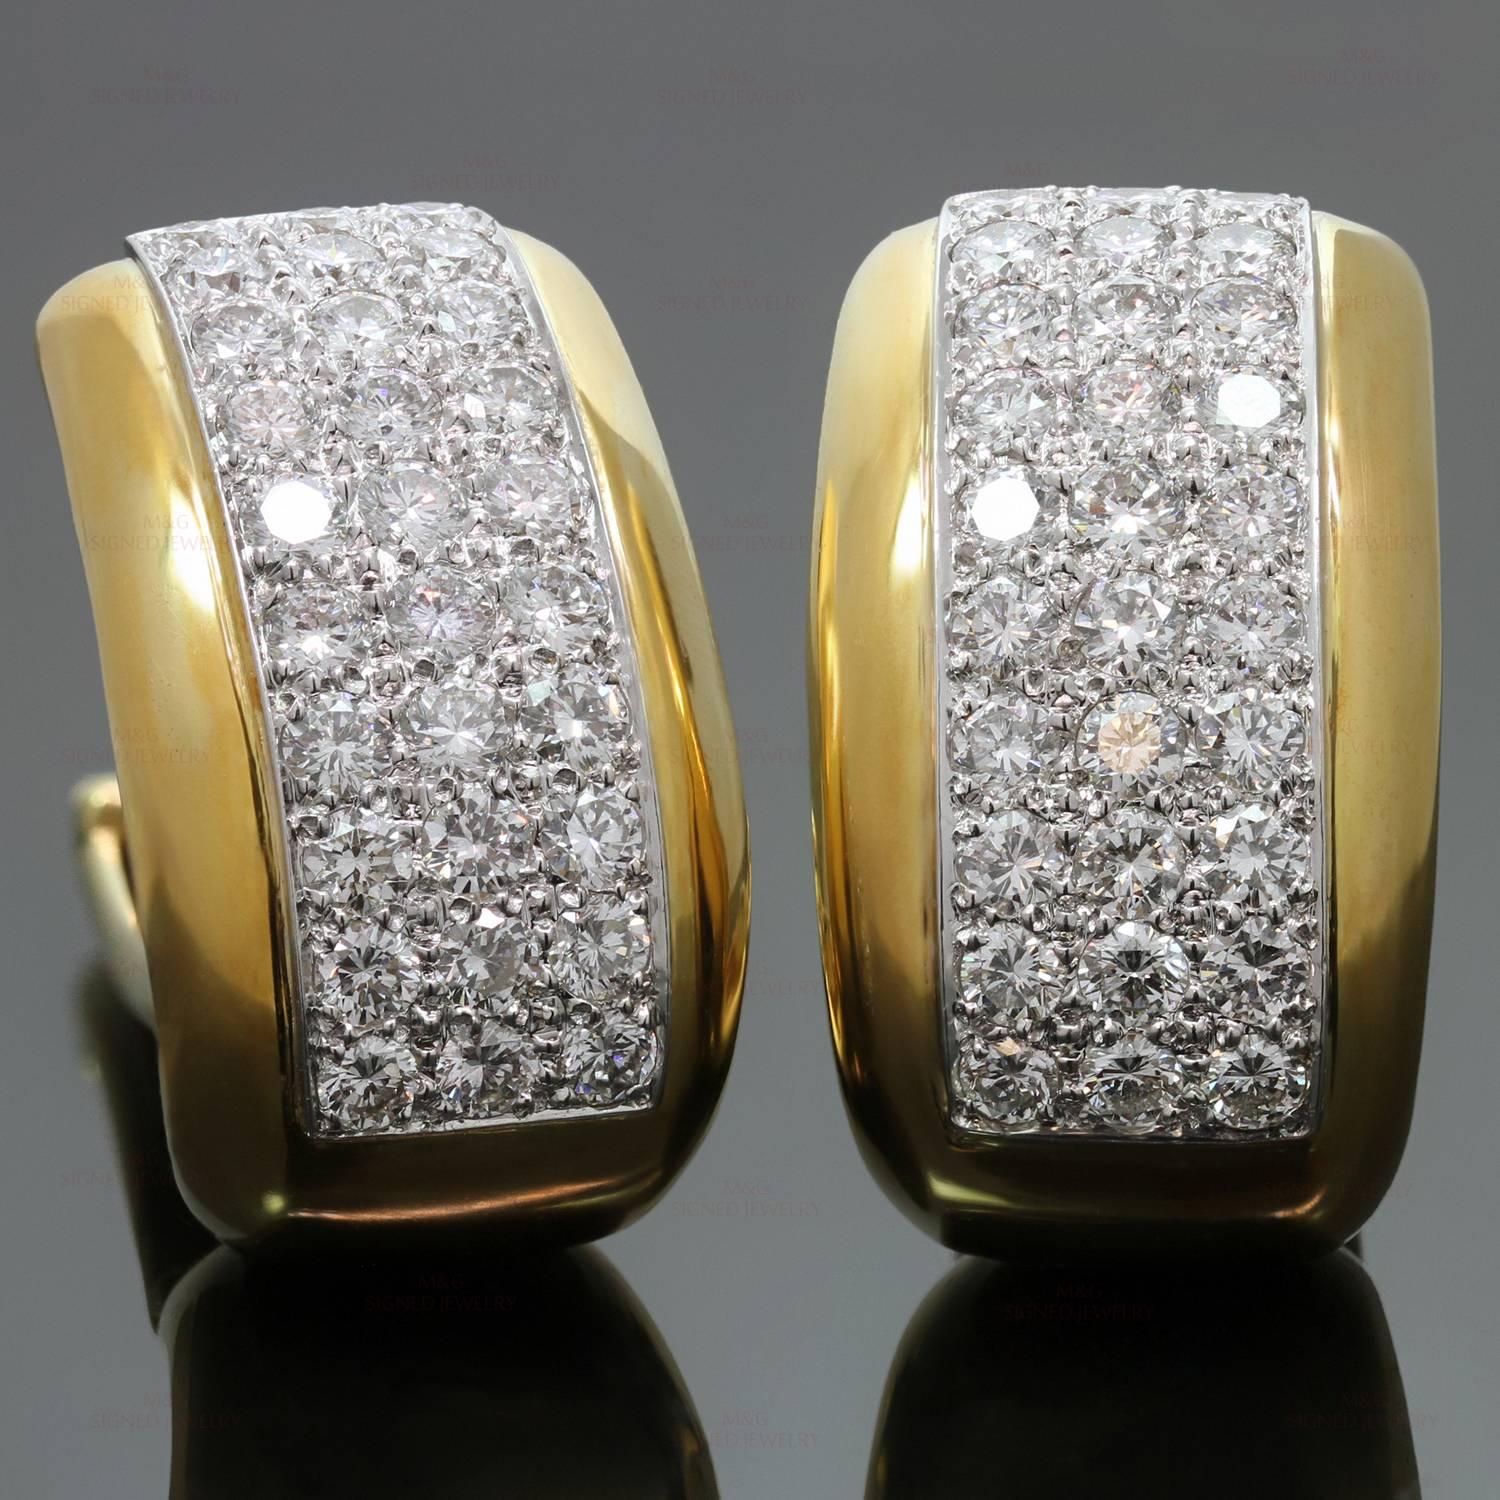 These impressive David Webb clip-on earrings are crafted in 18k yellow gold and accented with brilliant-cut round diamonds of an estimated 7.00 carats set in platinum. Made in United States circa 1990s. Measurements: 0.66